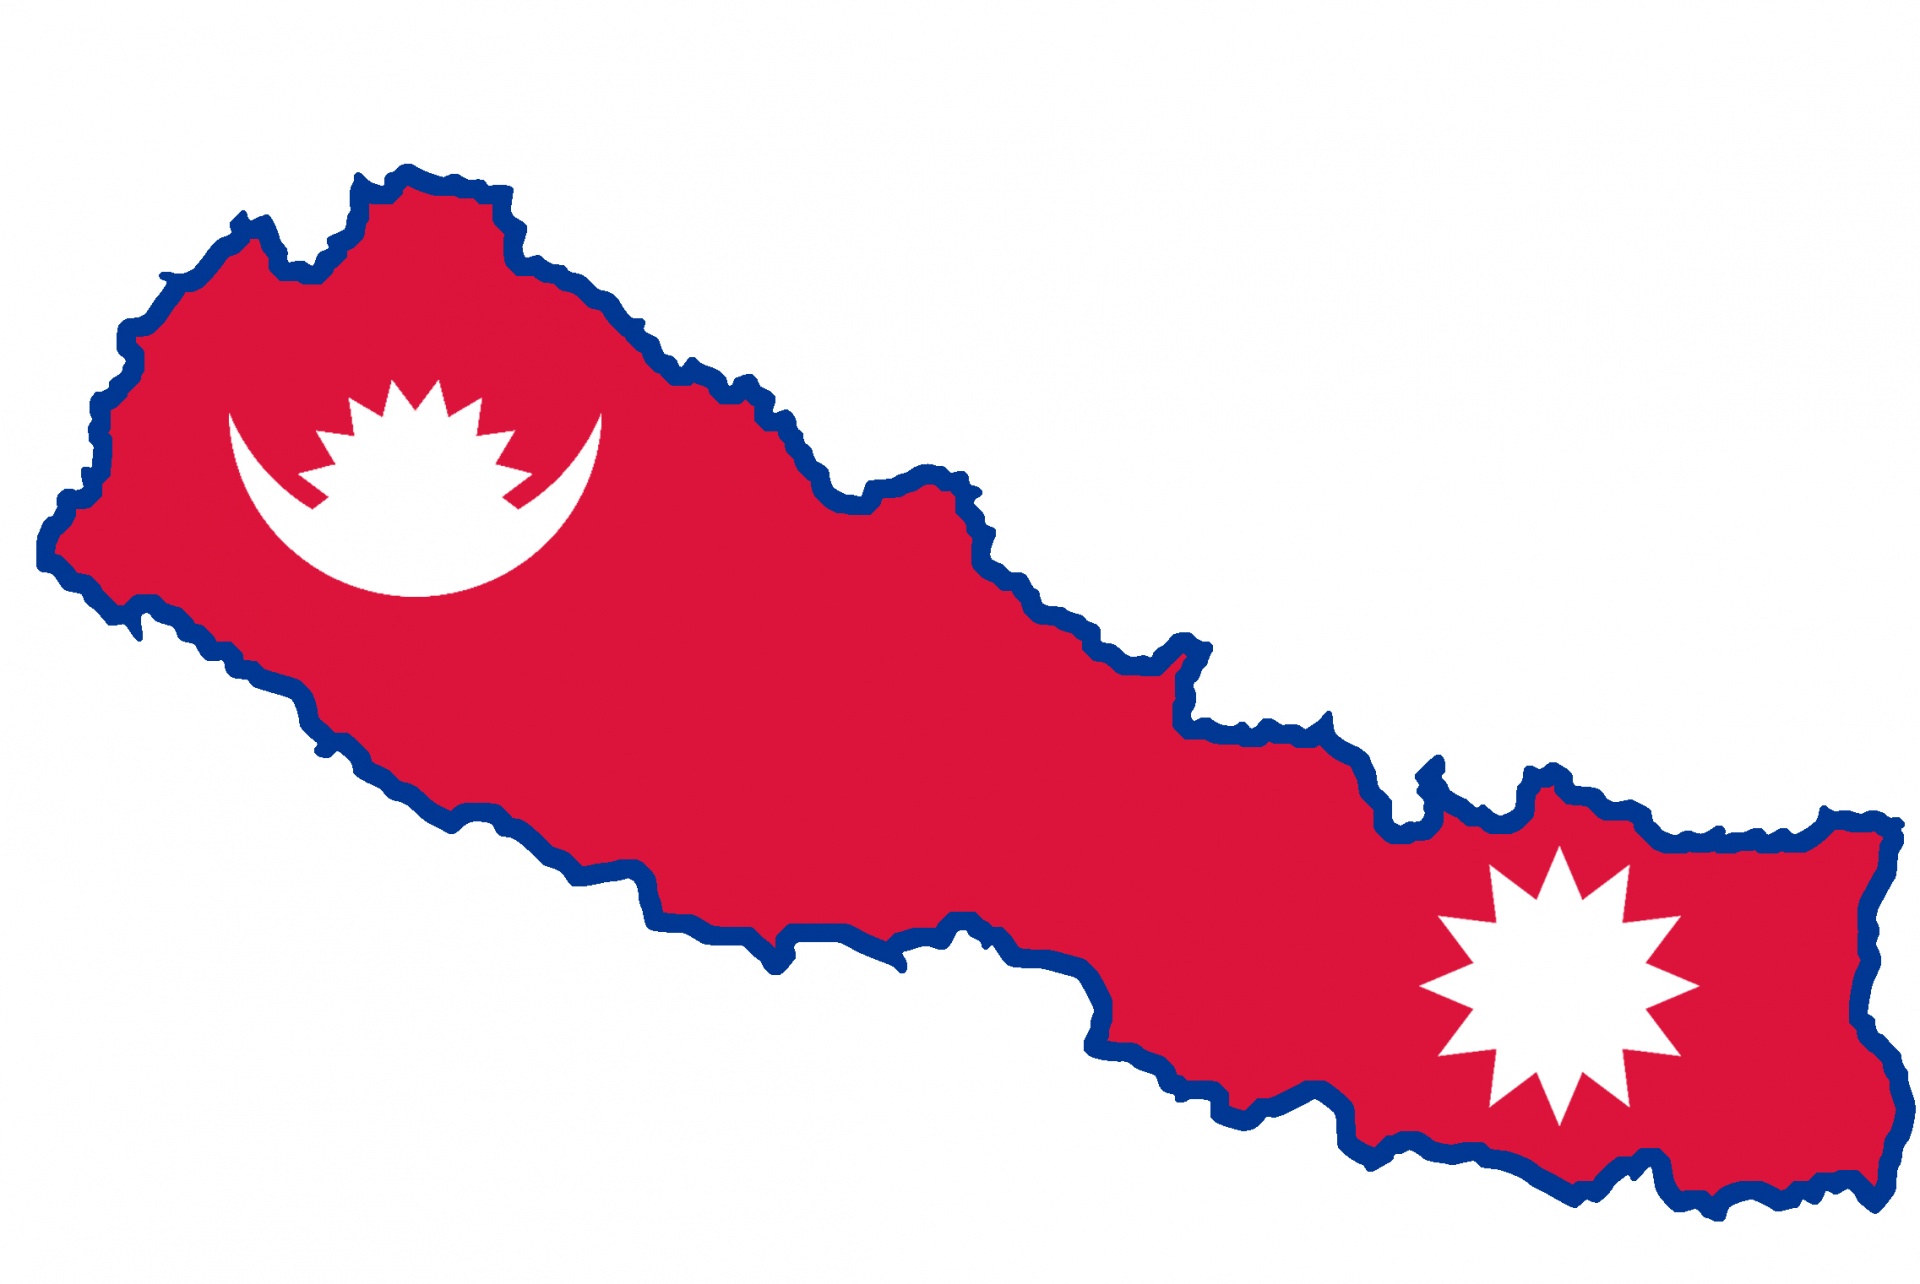 Nepal's commitment to tackle Climate Change